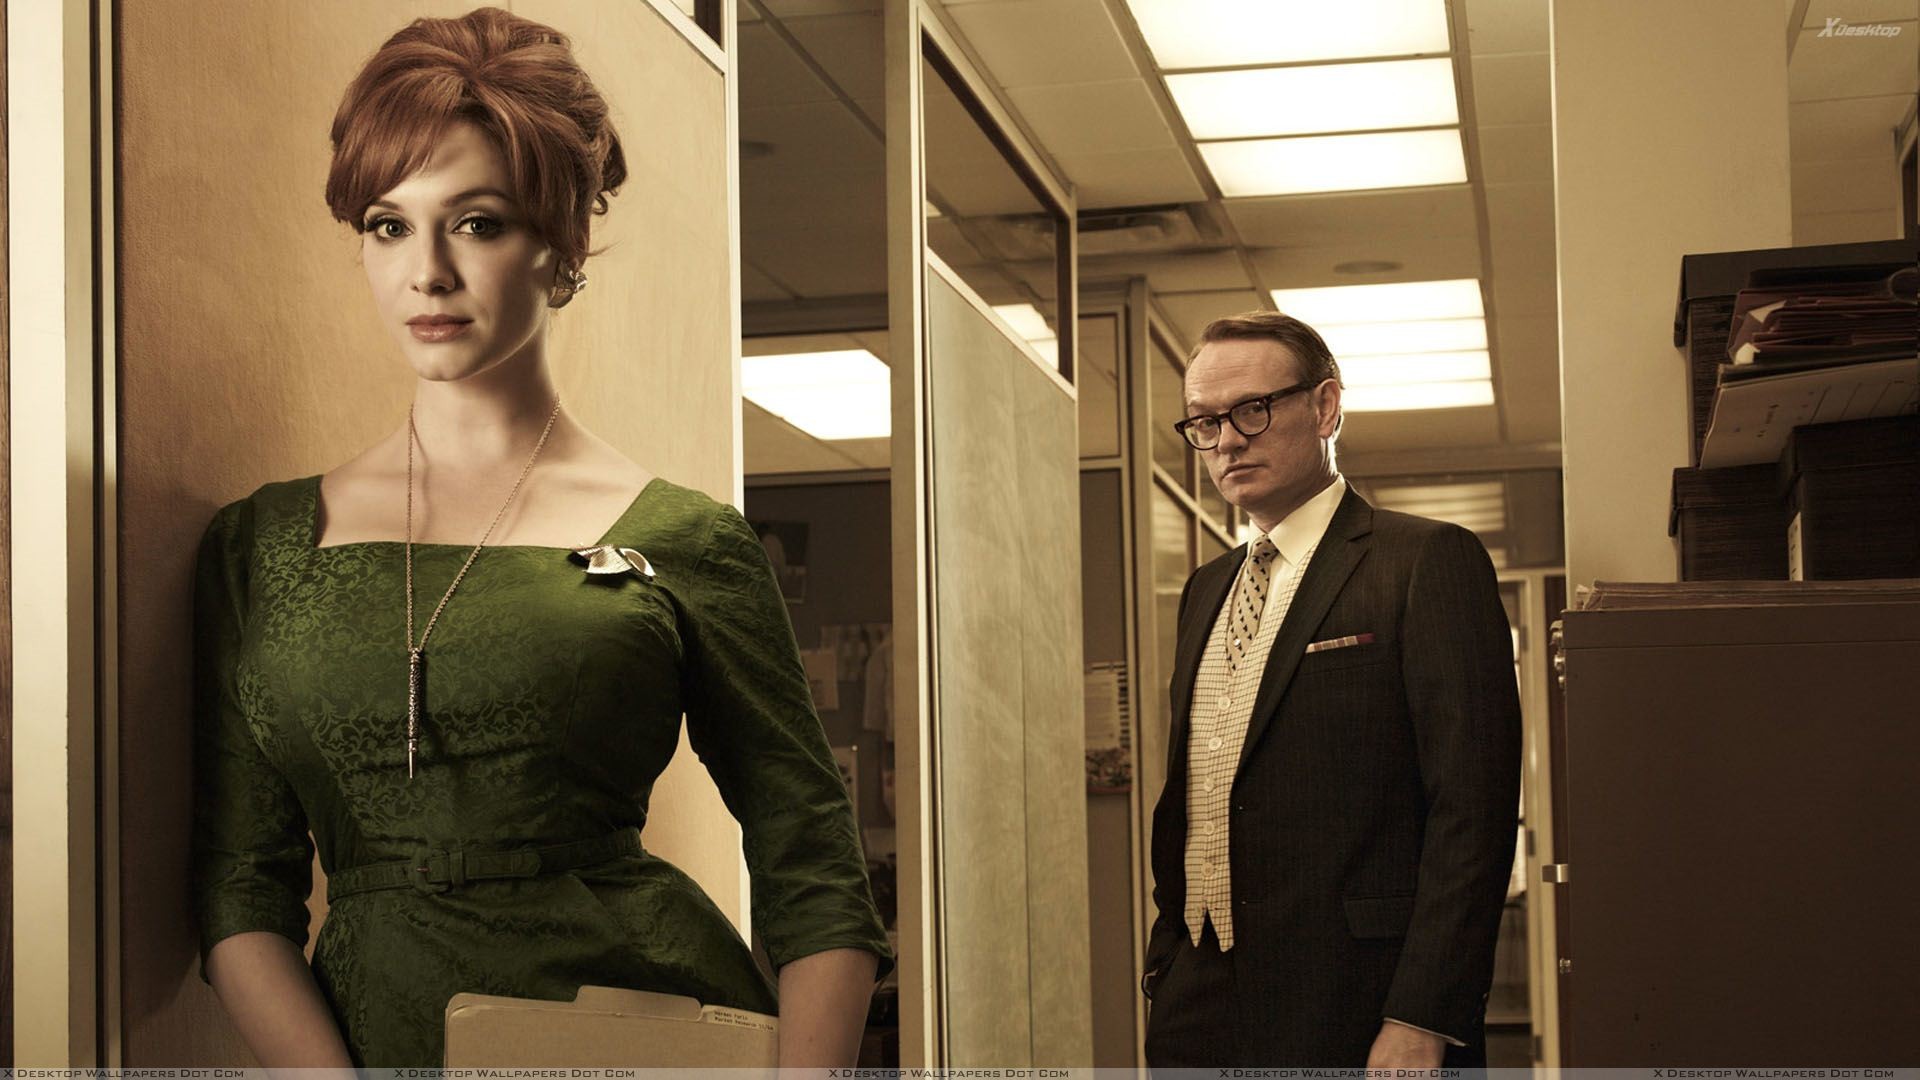 1920x1080 You are viewing wallpaper titled "Mad Men ...